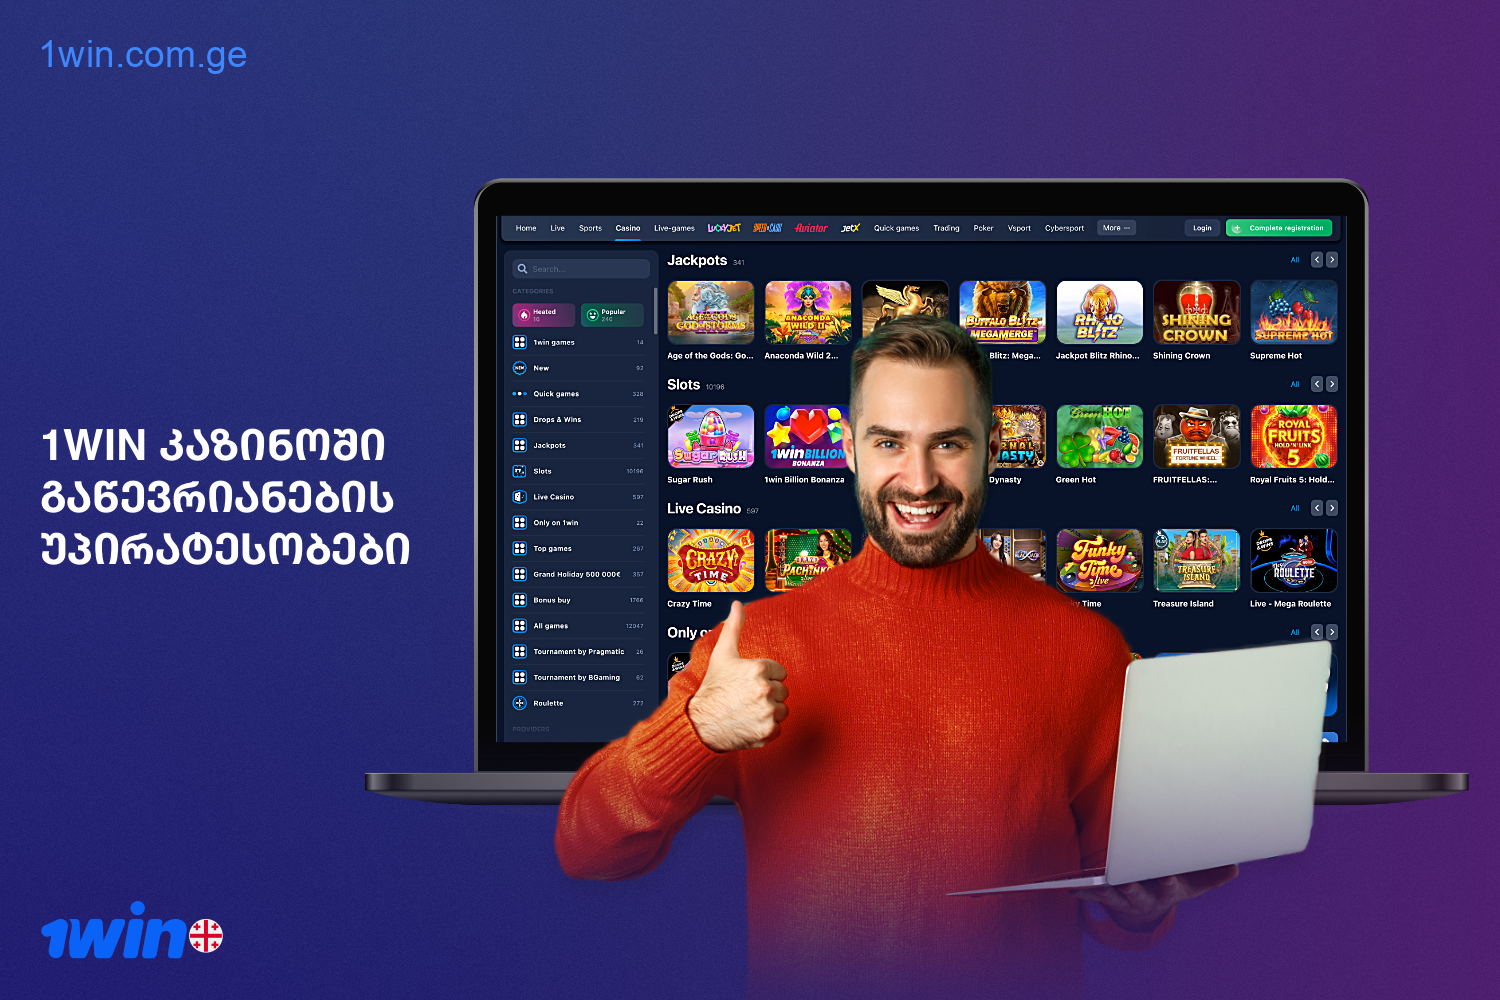 1win online casino has a number of advantages that are appreciated by thousands of players from Georgia